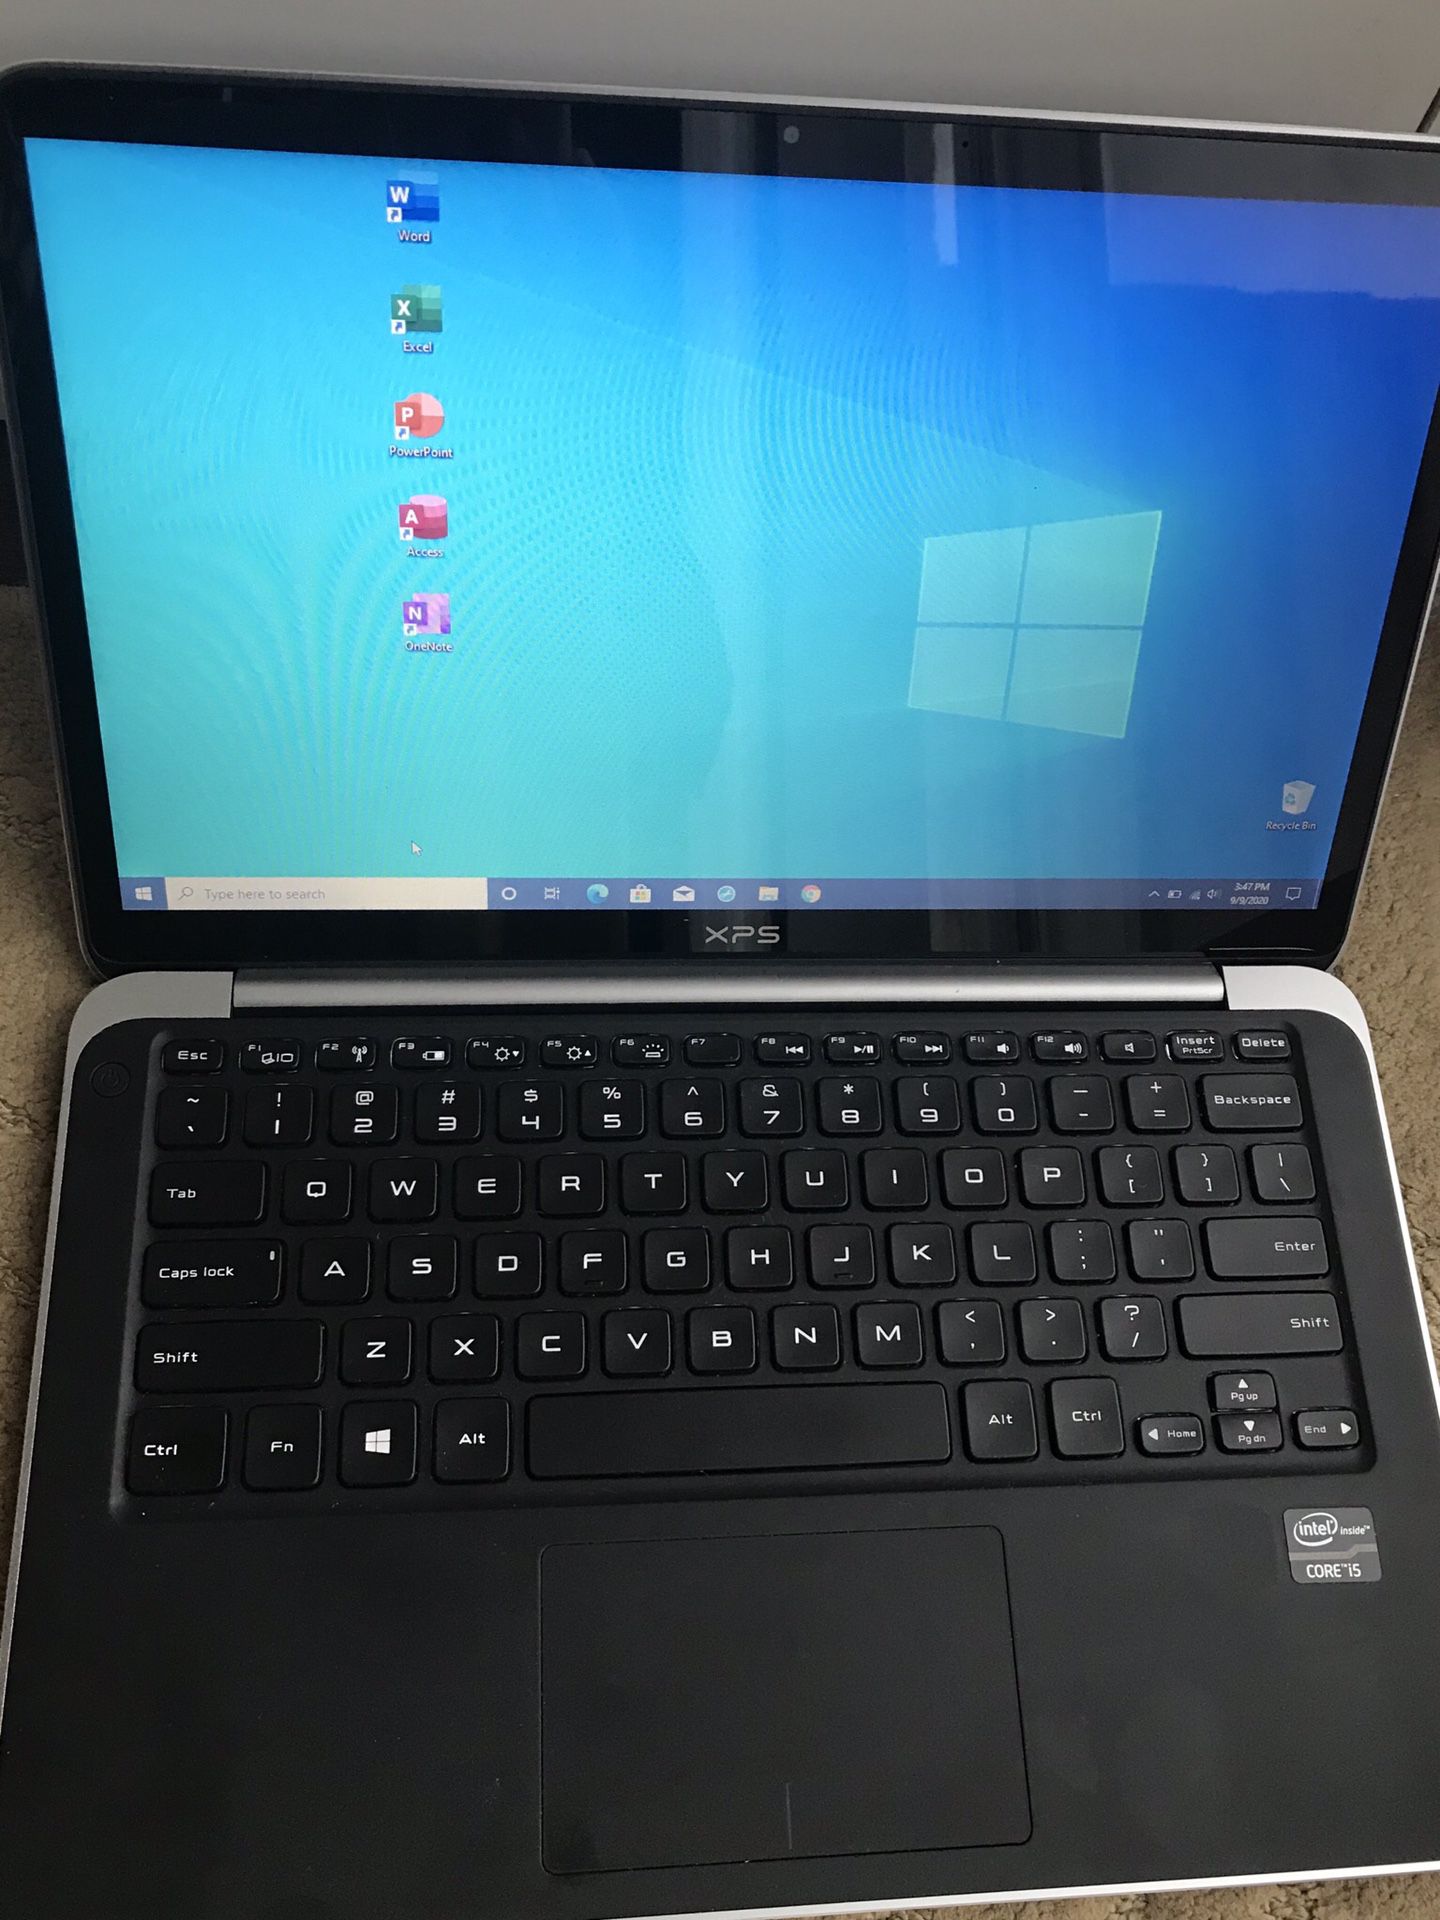 12" DELL XPS - Intel i5 - 4GB RAM - SAMSUNG 256GB SSD - Slim and Light Design - Sometimes the display flickers but it turns normal when you close and